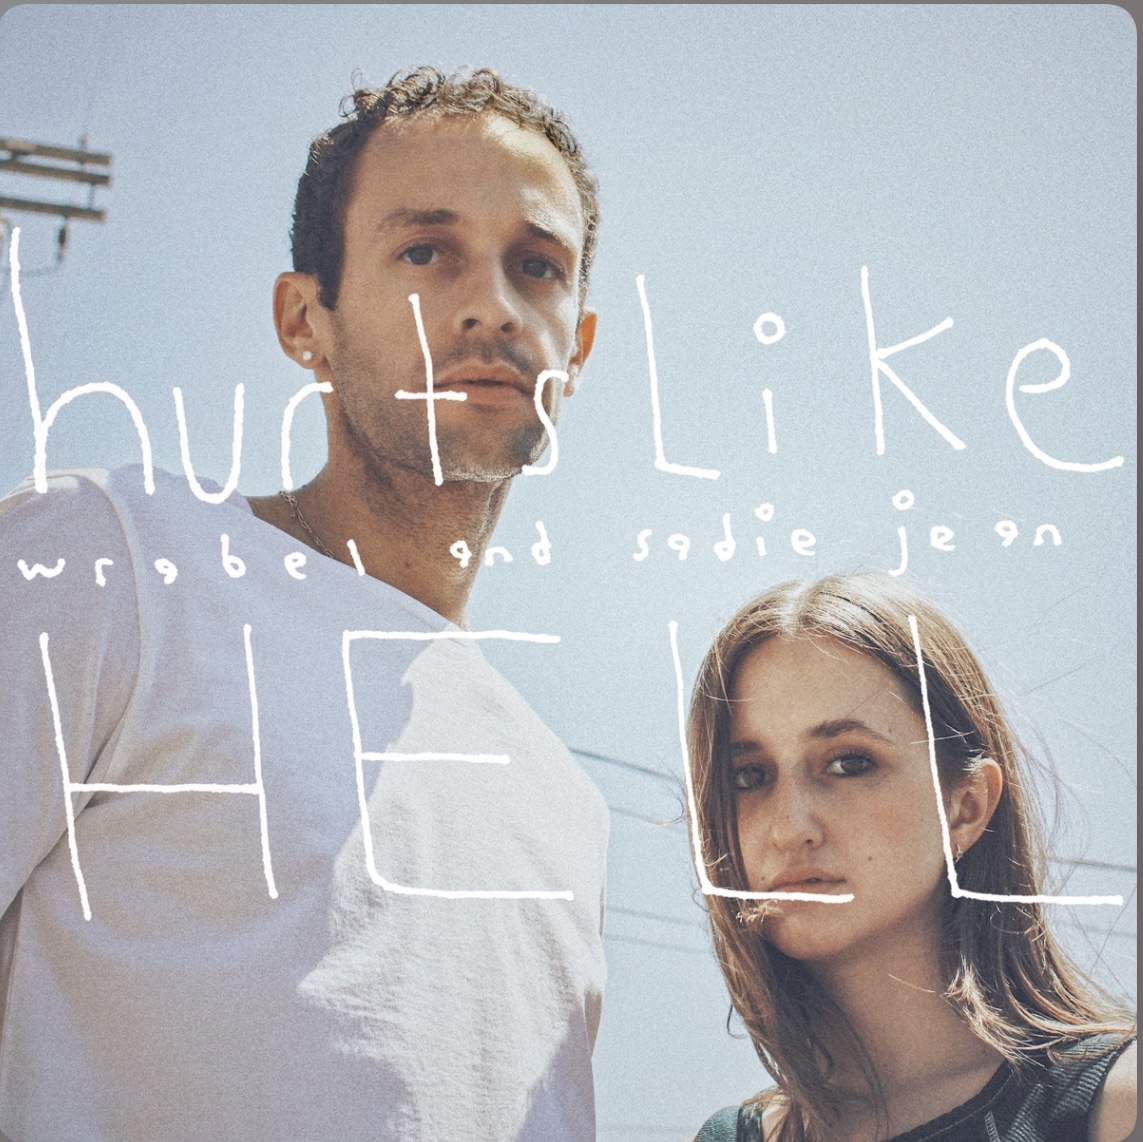 Wrabel featuring Sadie Jean — Hurts Like Hell cover artwork